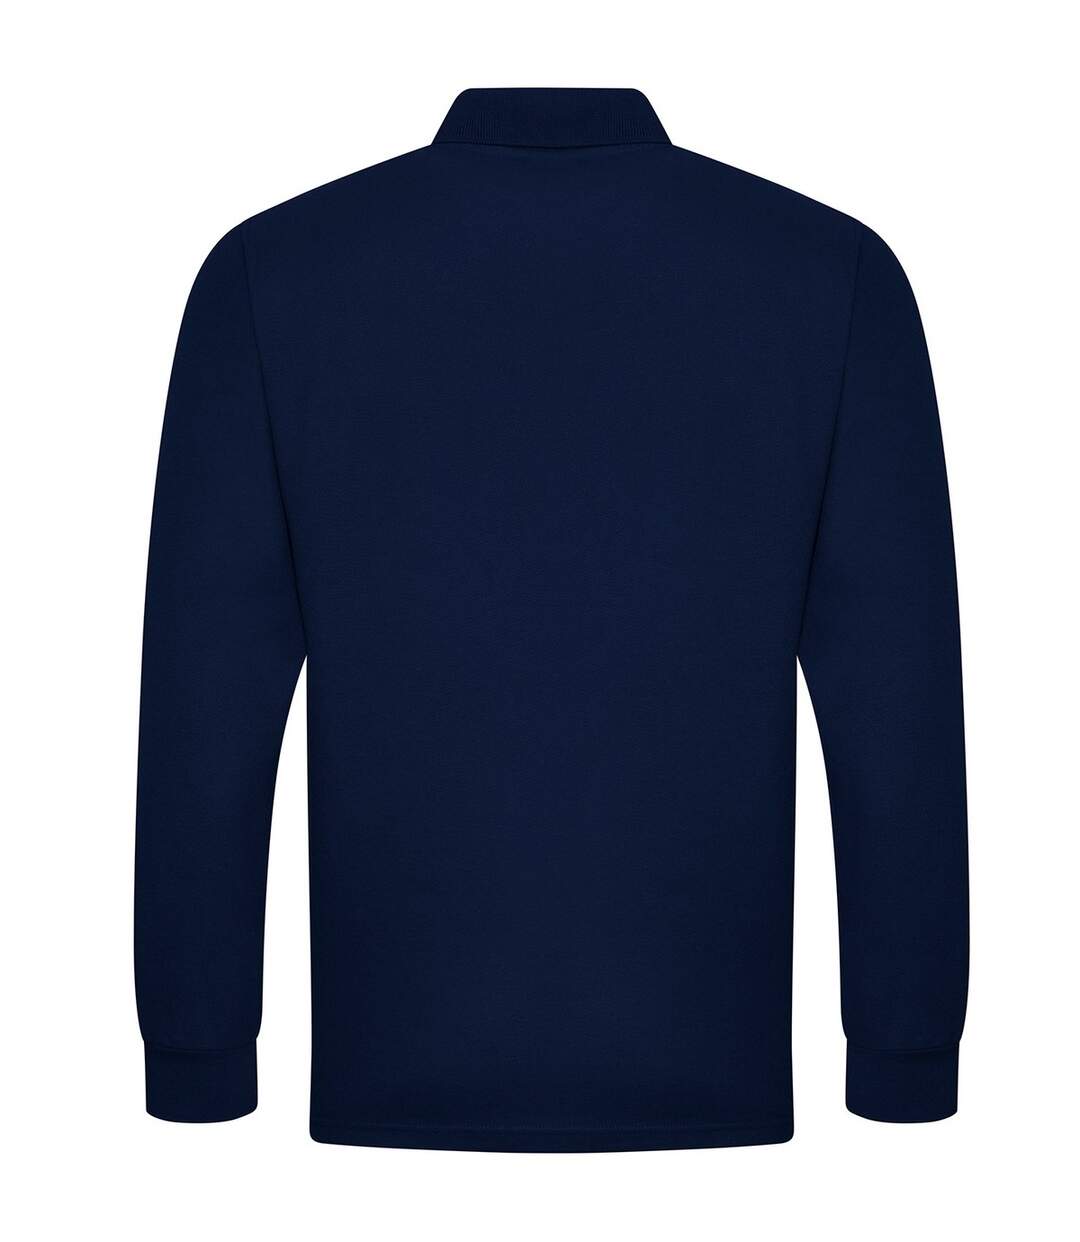 PRORTX Mens Long-Sleeved Polo Shirt (Navy)